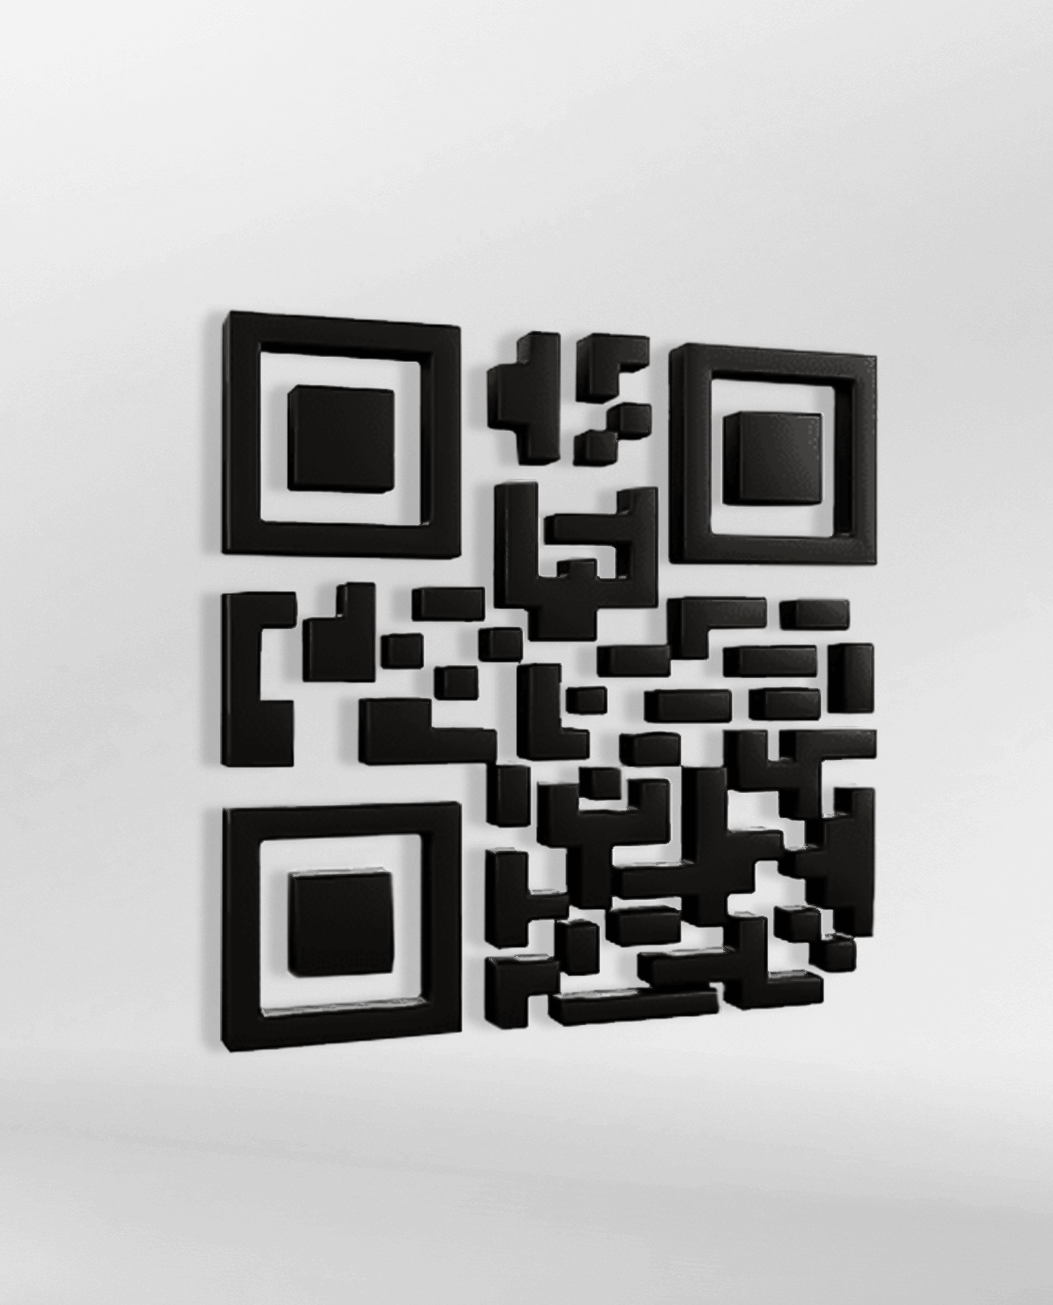 Express QR Code Generator - Free and Fast